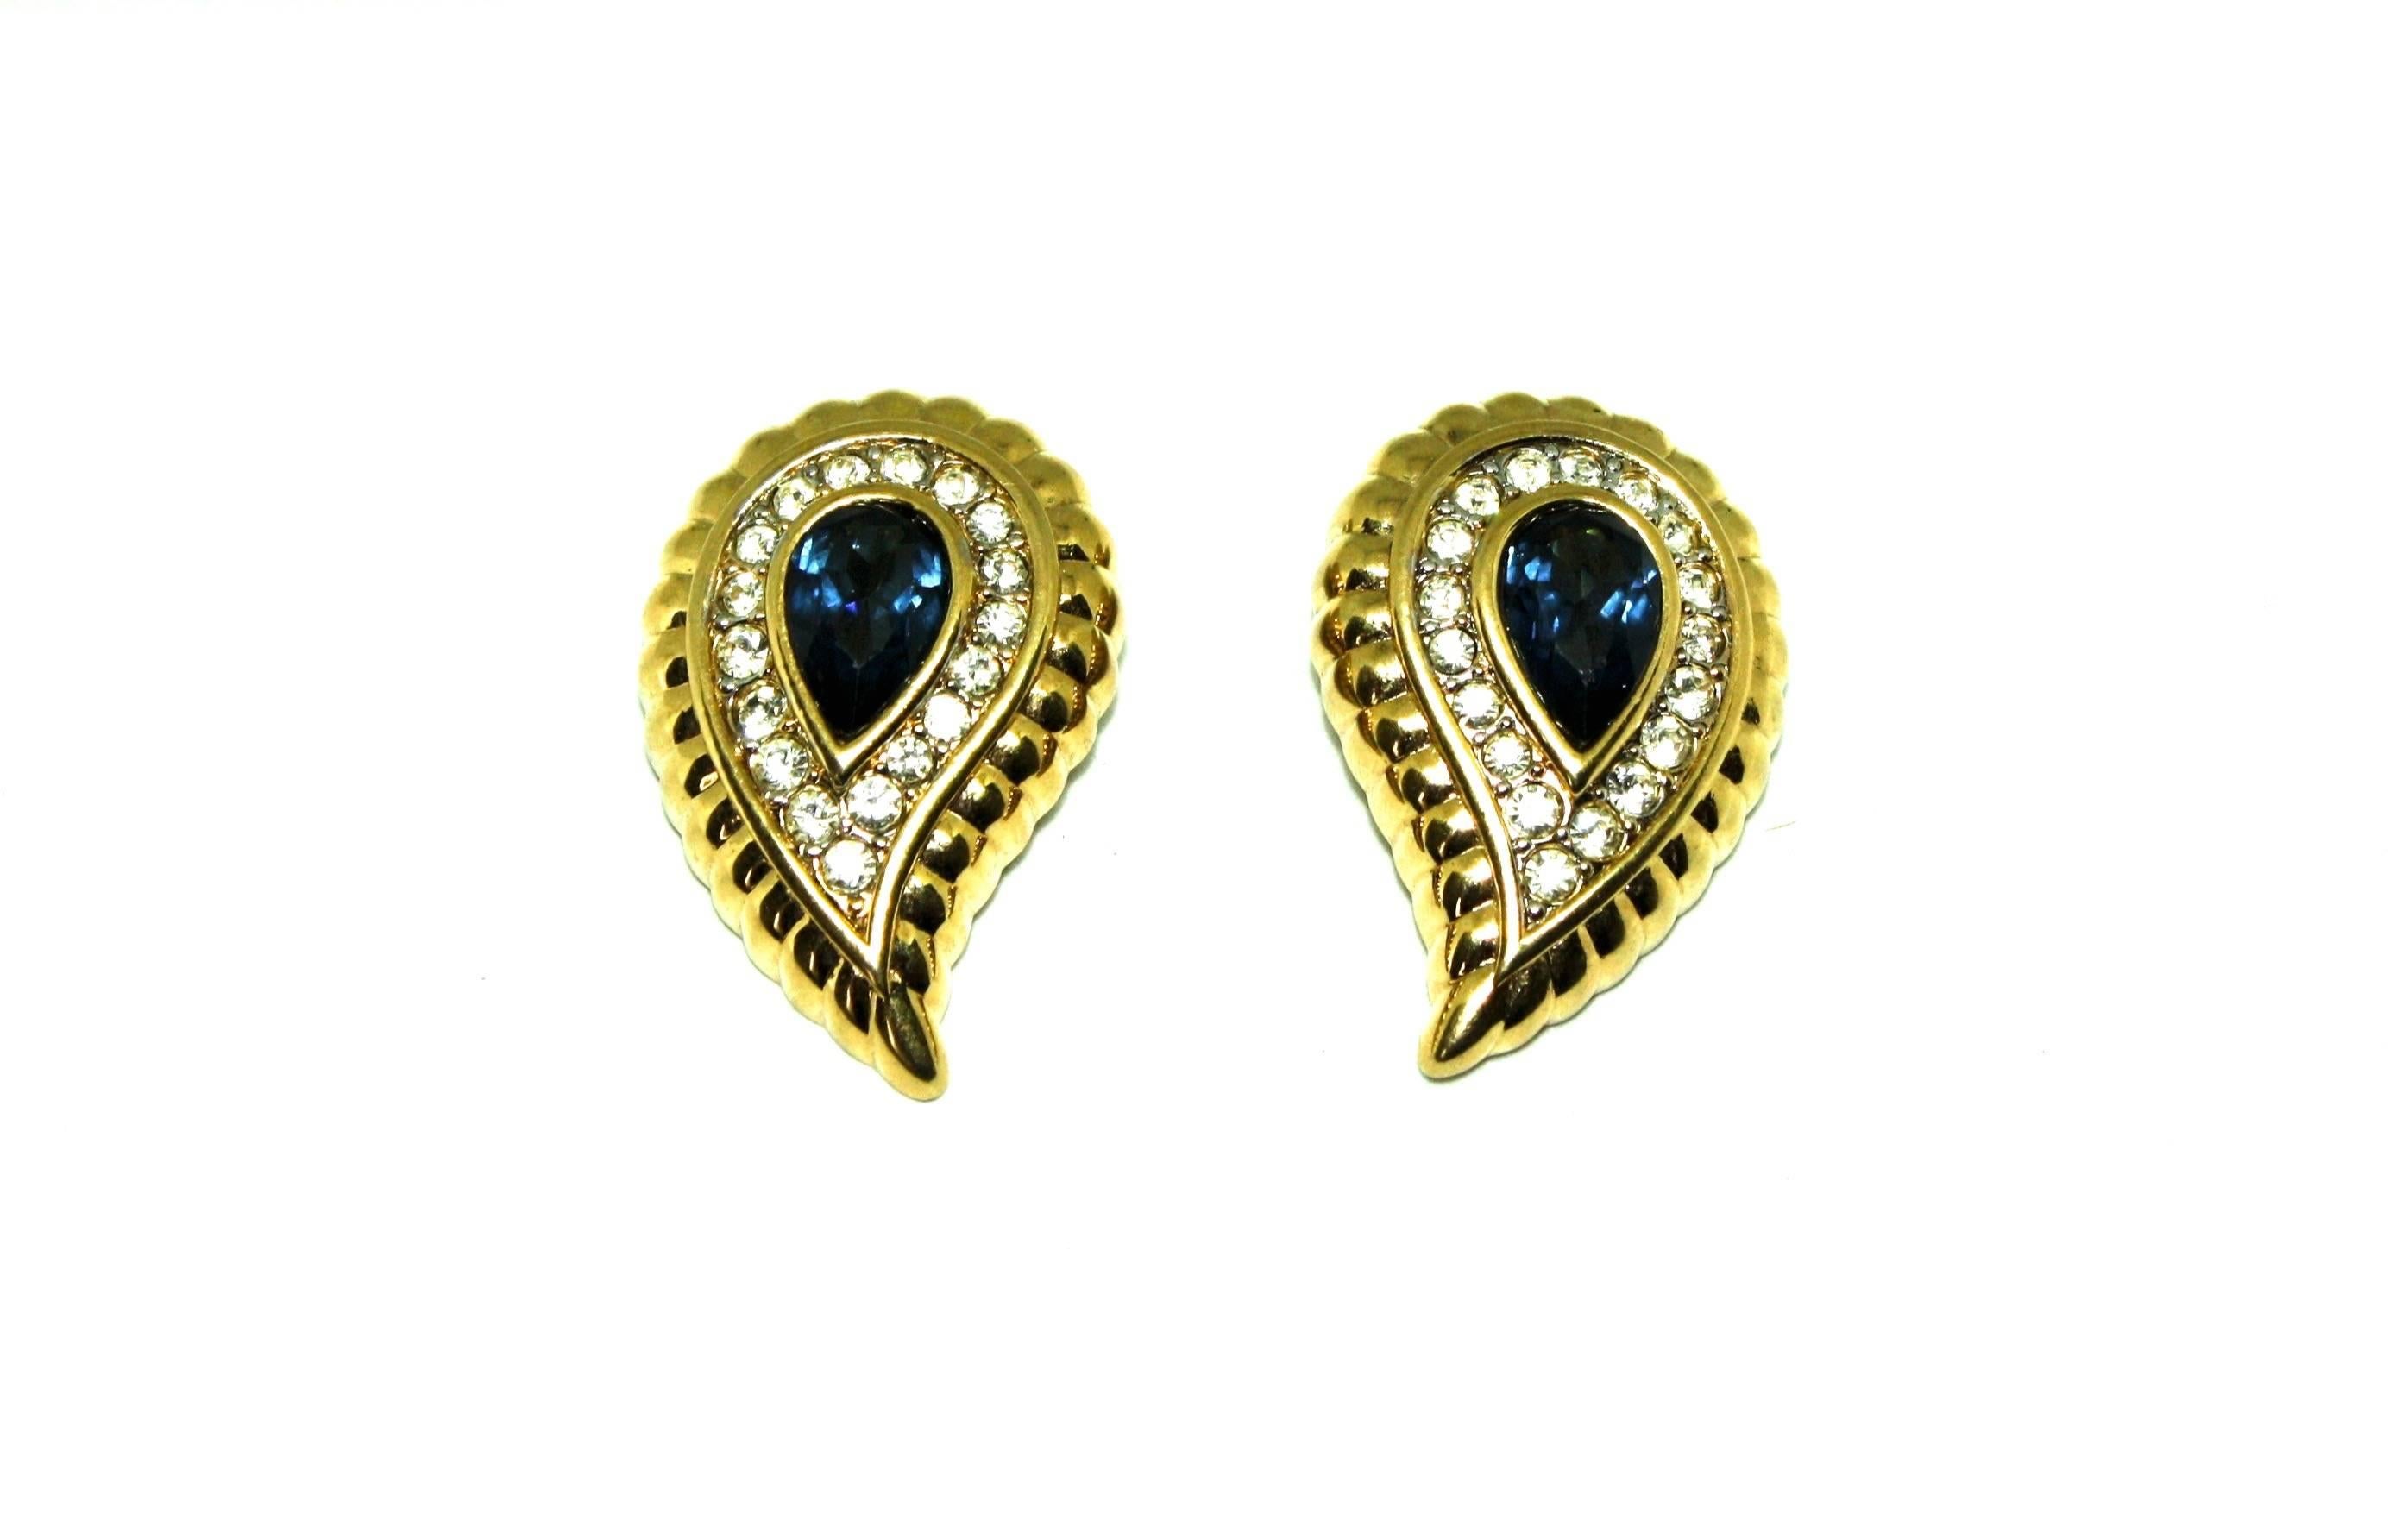 Paisley shape clip earrings featuring a large sapphire coloured glass stone and smaller white rhinestones by Nina Ricci. The name Nina Ricci its marked on the reverse of both clips along with a copyright mark. These earrings have been dated to the